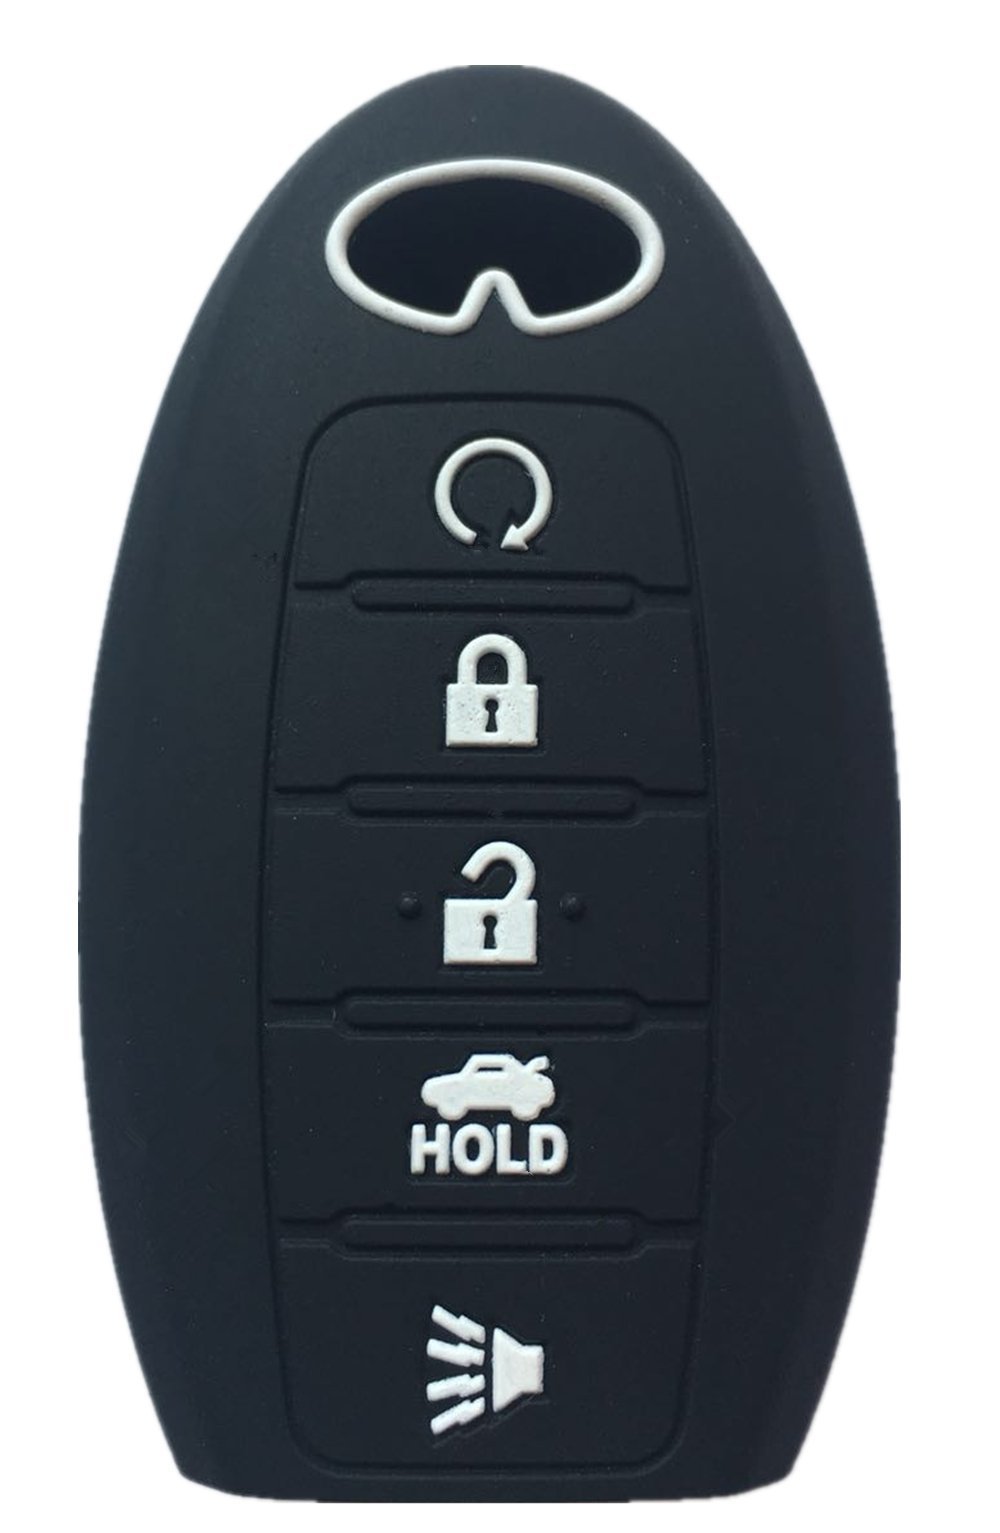  [AUSTRALIA] - Rpkey Silicone Keyless Entry Remote Control Key Fob Cover Case protector For Infiniti 2014 2015 2016 QX60 QX80 2013 JX35 S180144014